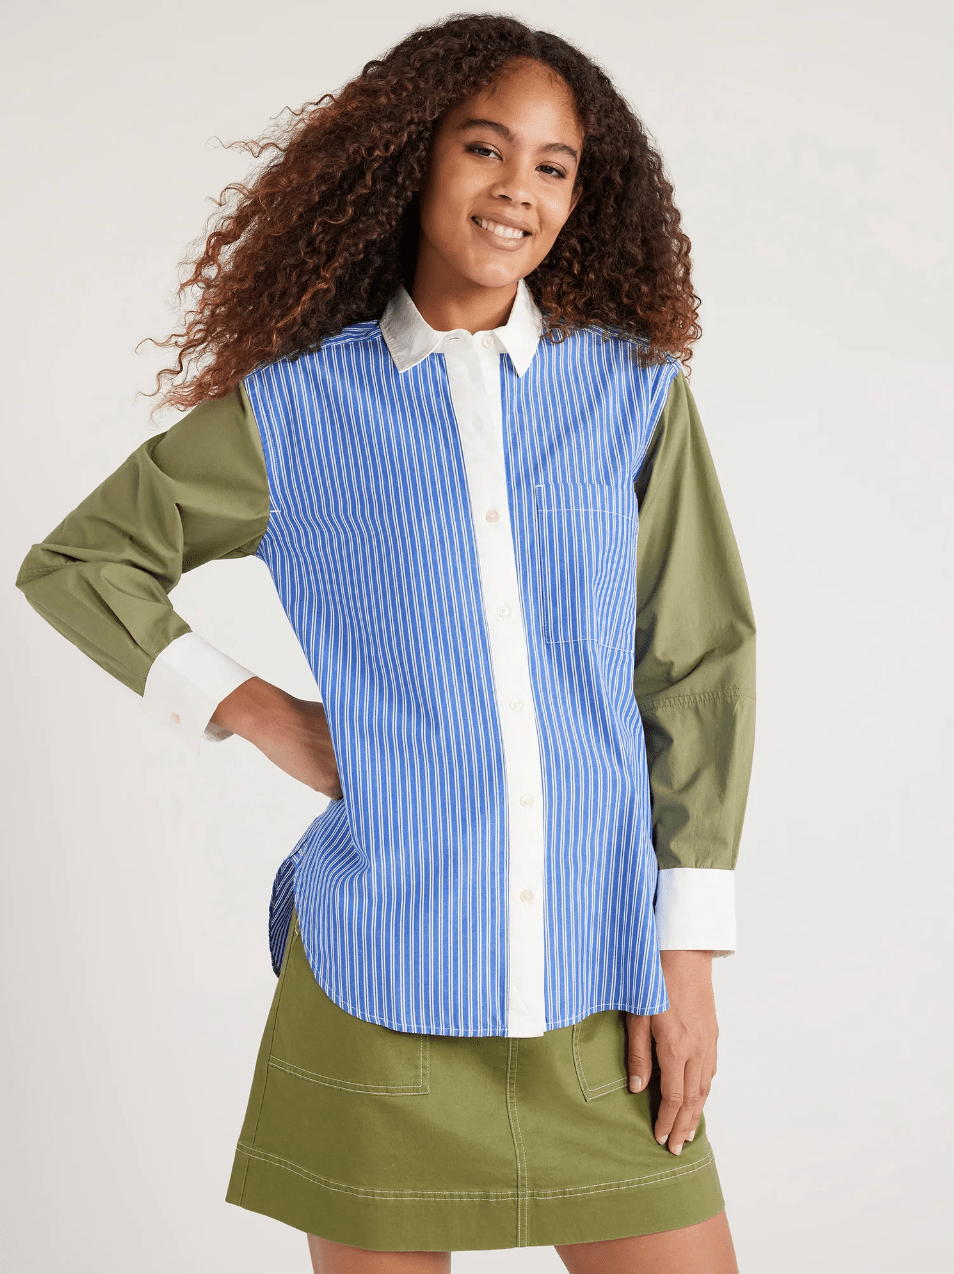 Free Assembly Women's Button Front Boxy Tunic Shirt with Long Sleeves